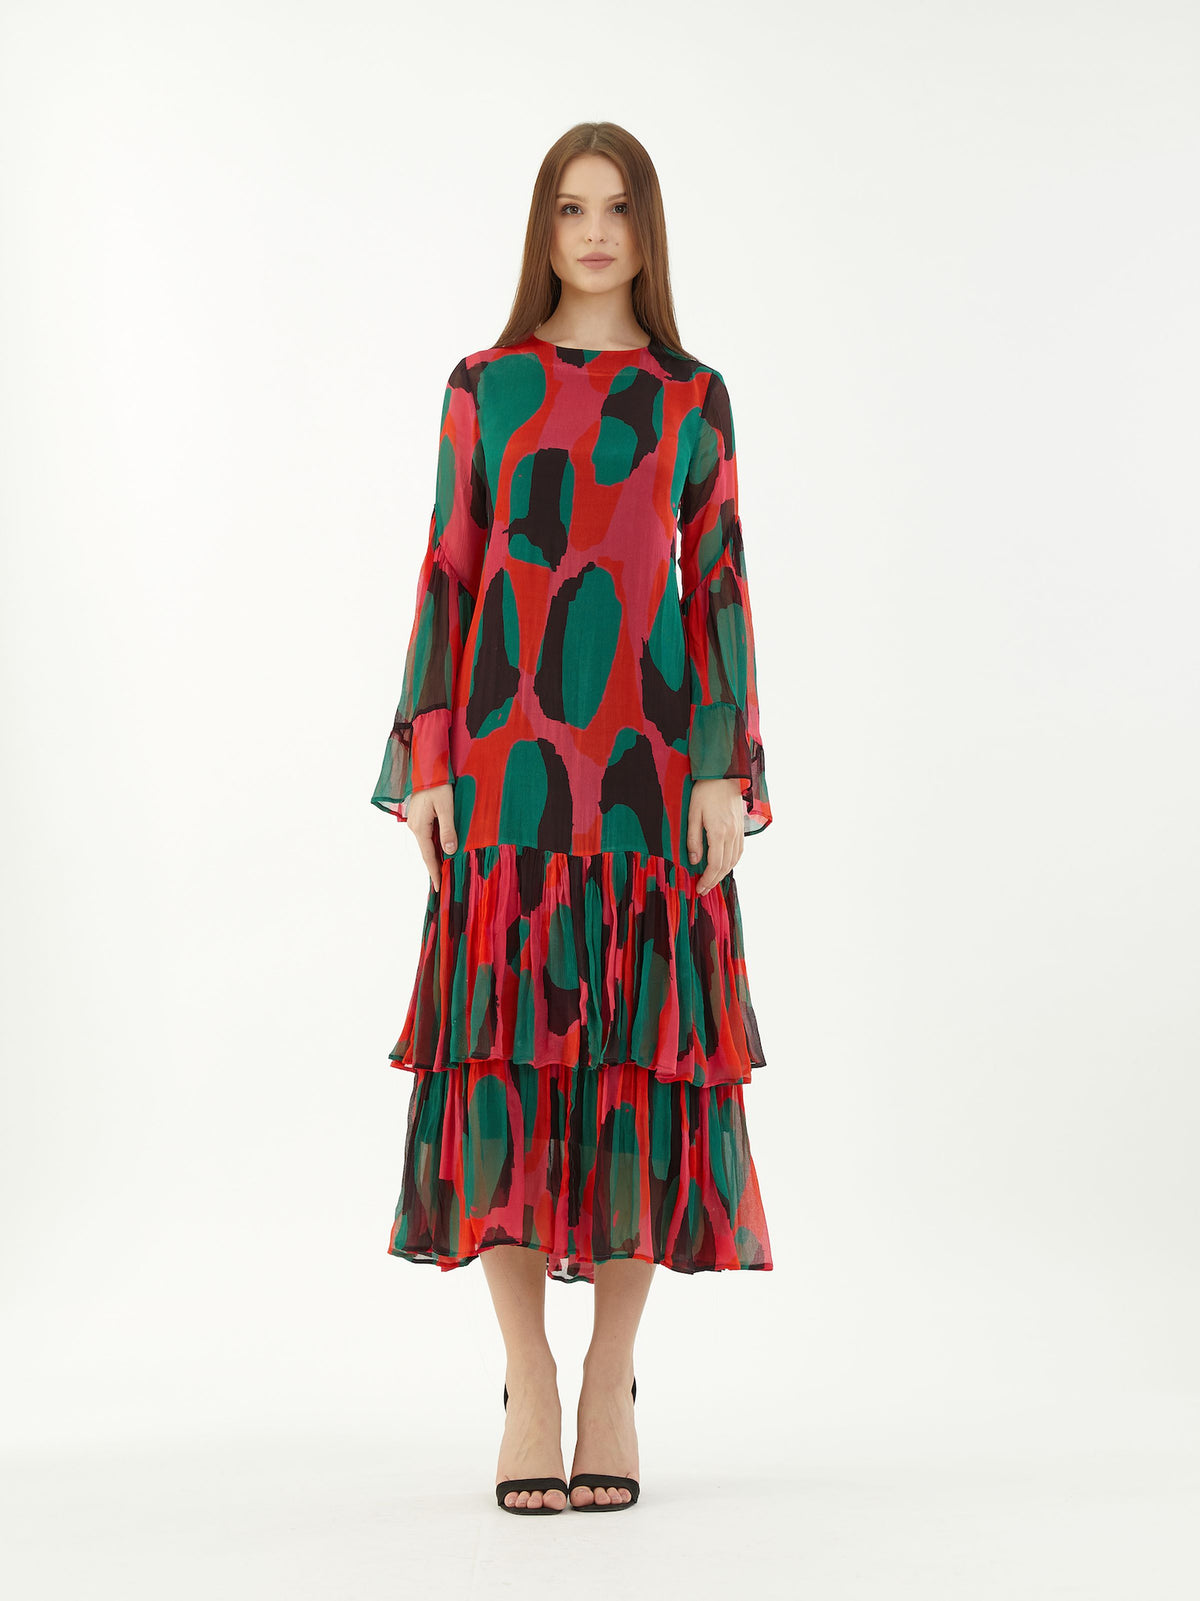 RED, GREEN AND BLACK ABSTRACT FRILL DRESS